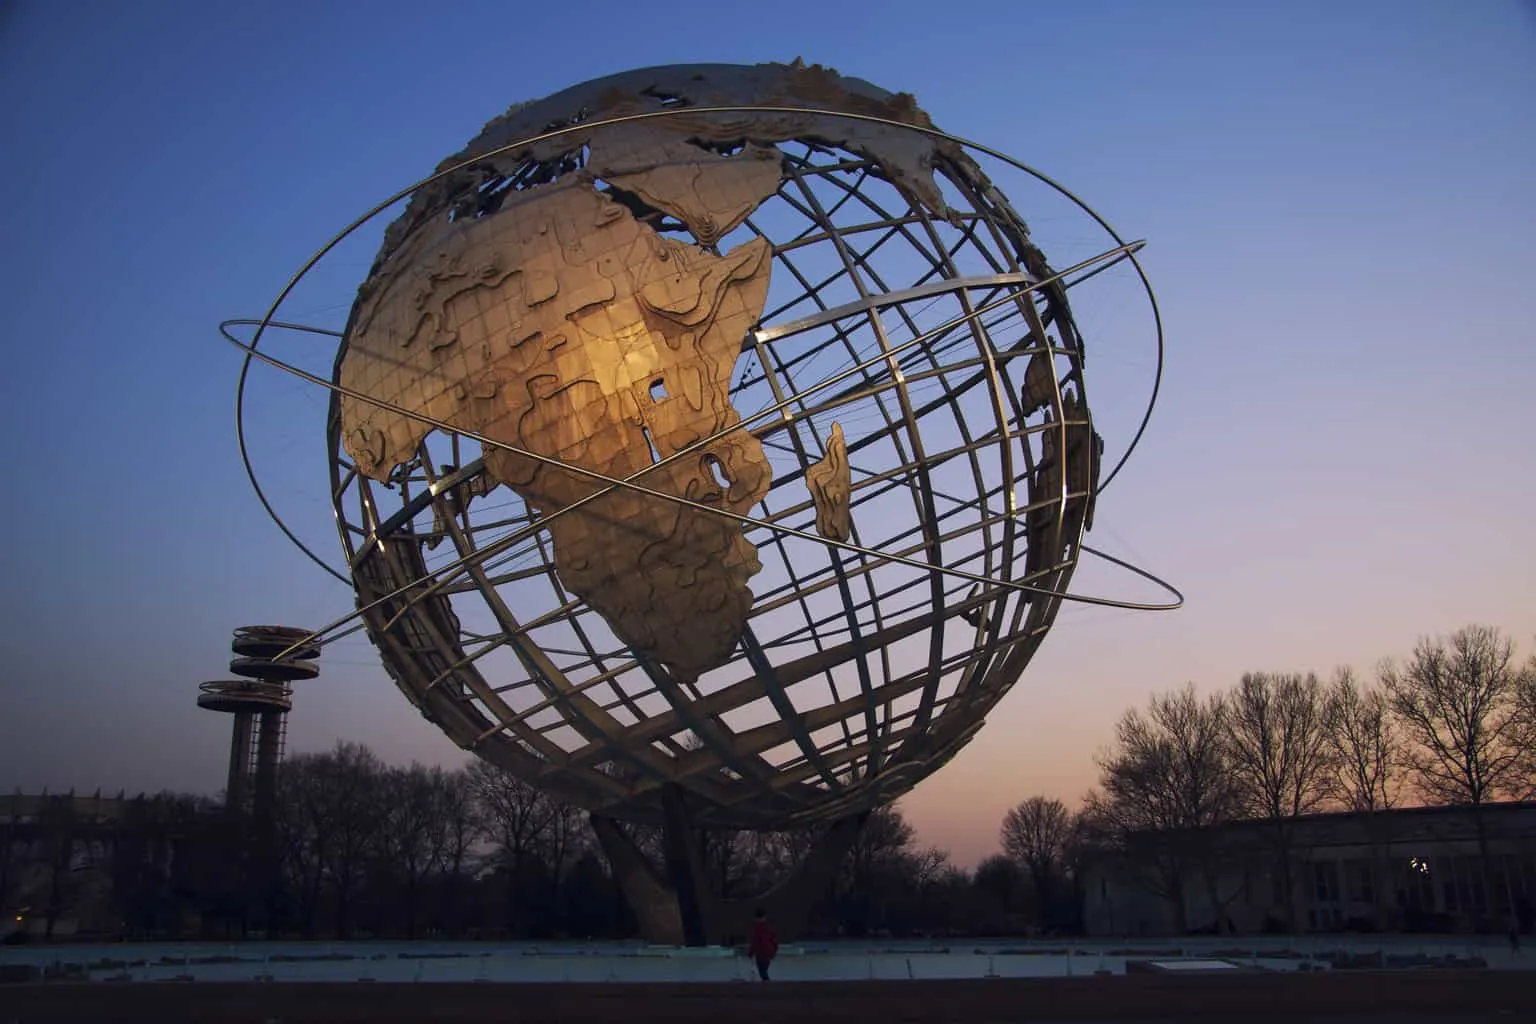 Flushing Meadow Park should be on everyone's NYC bucket list. 